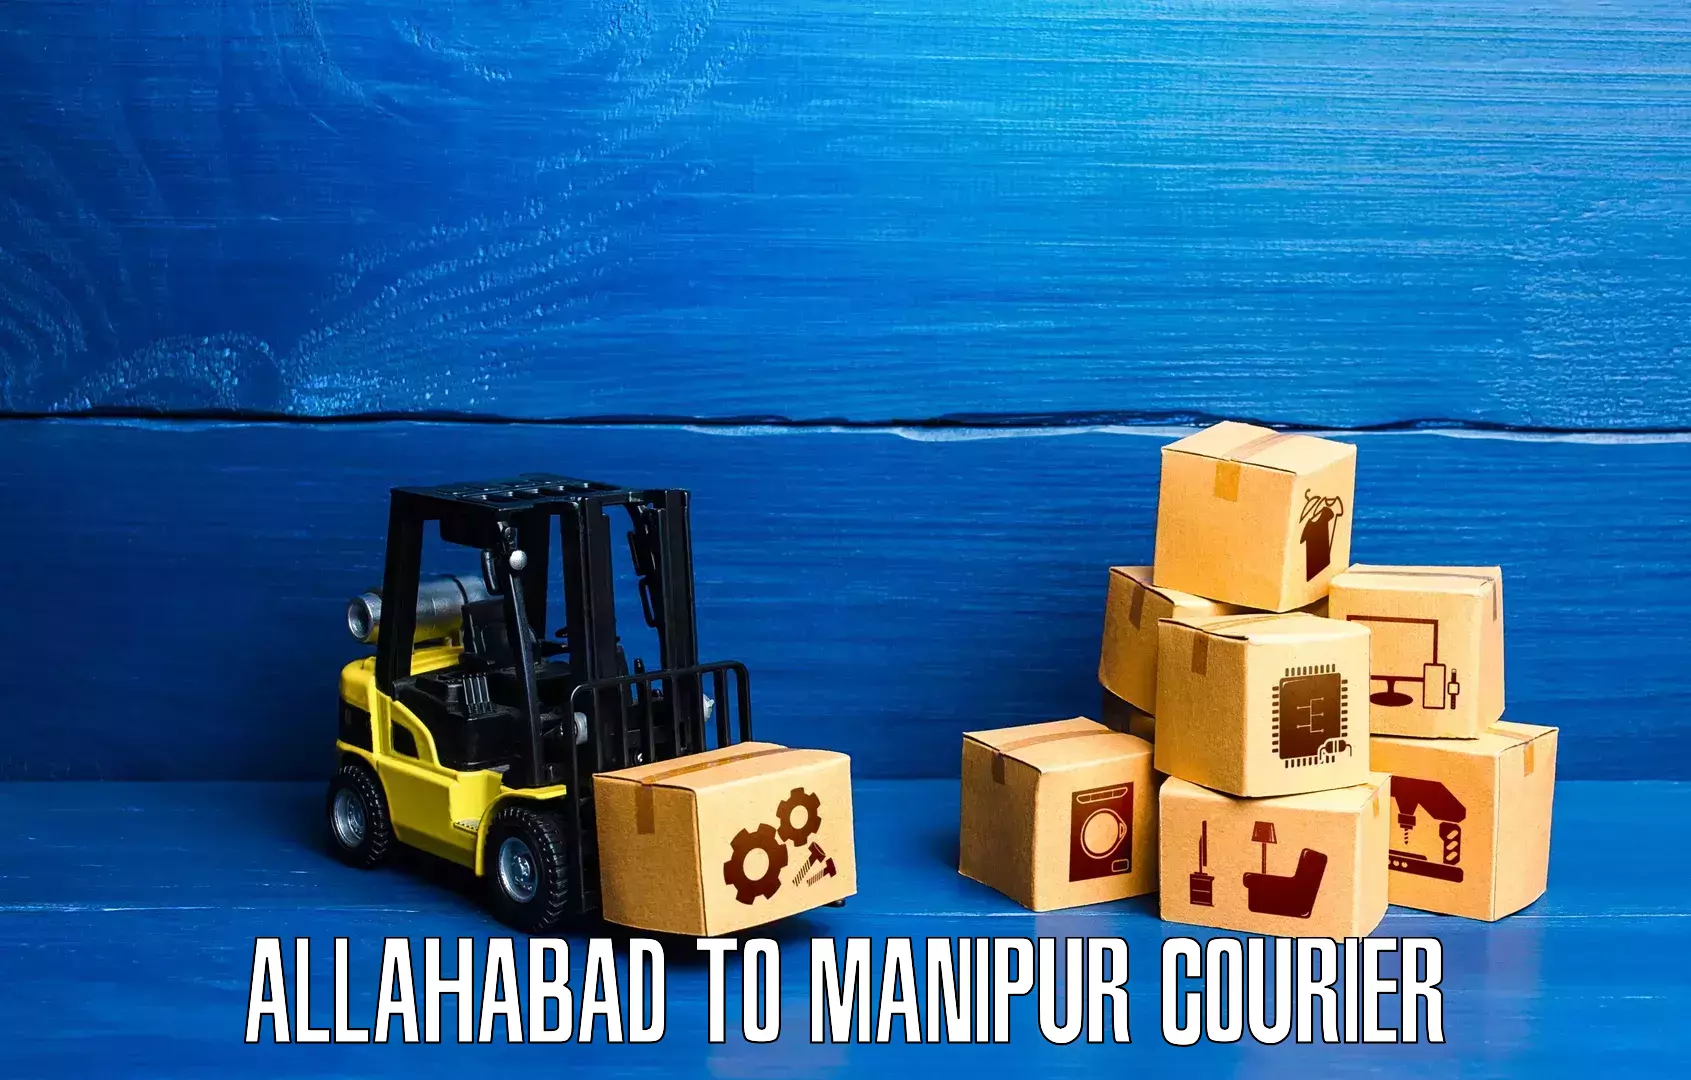 Courier service innovation Allahabad to Imphal